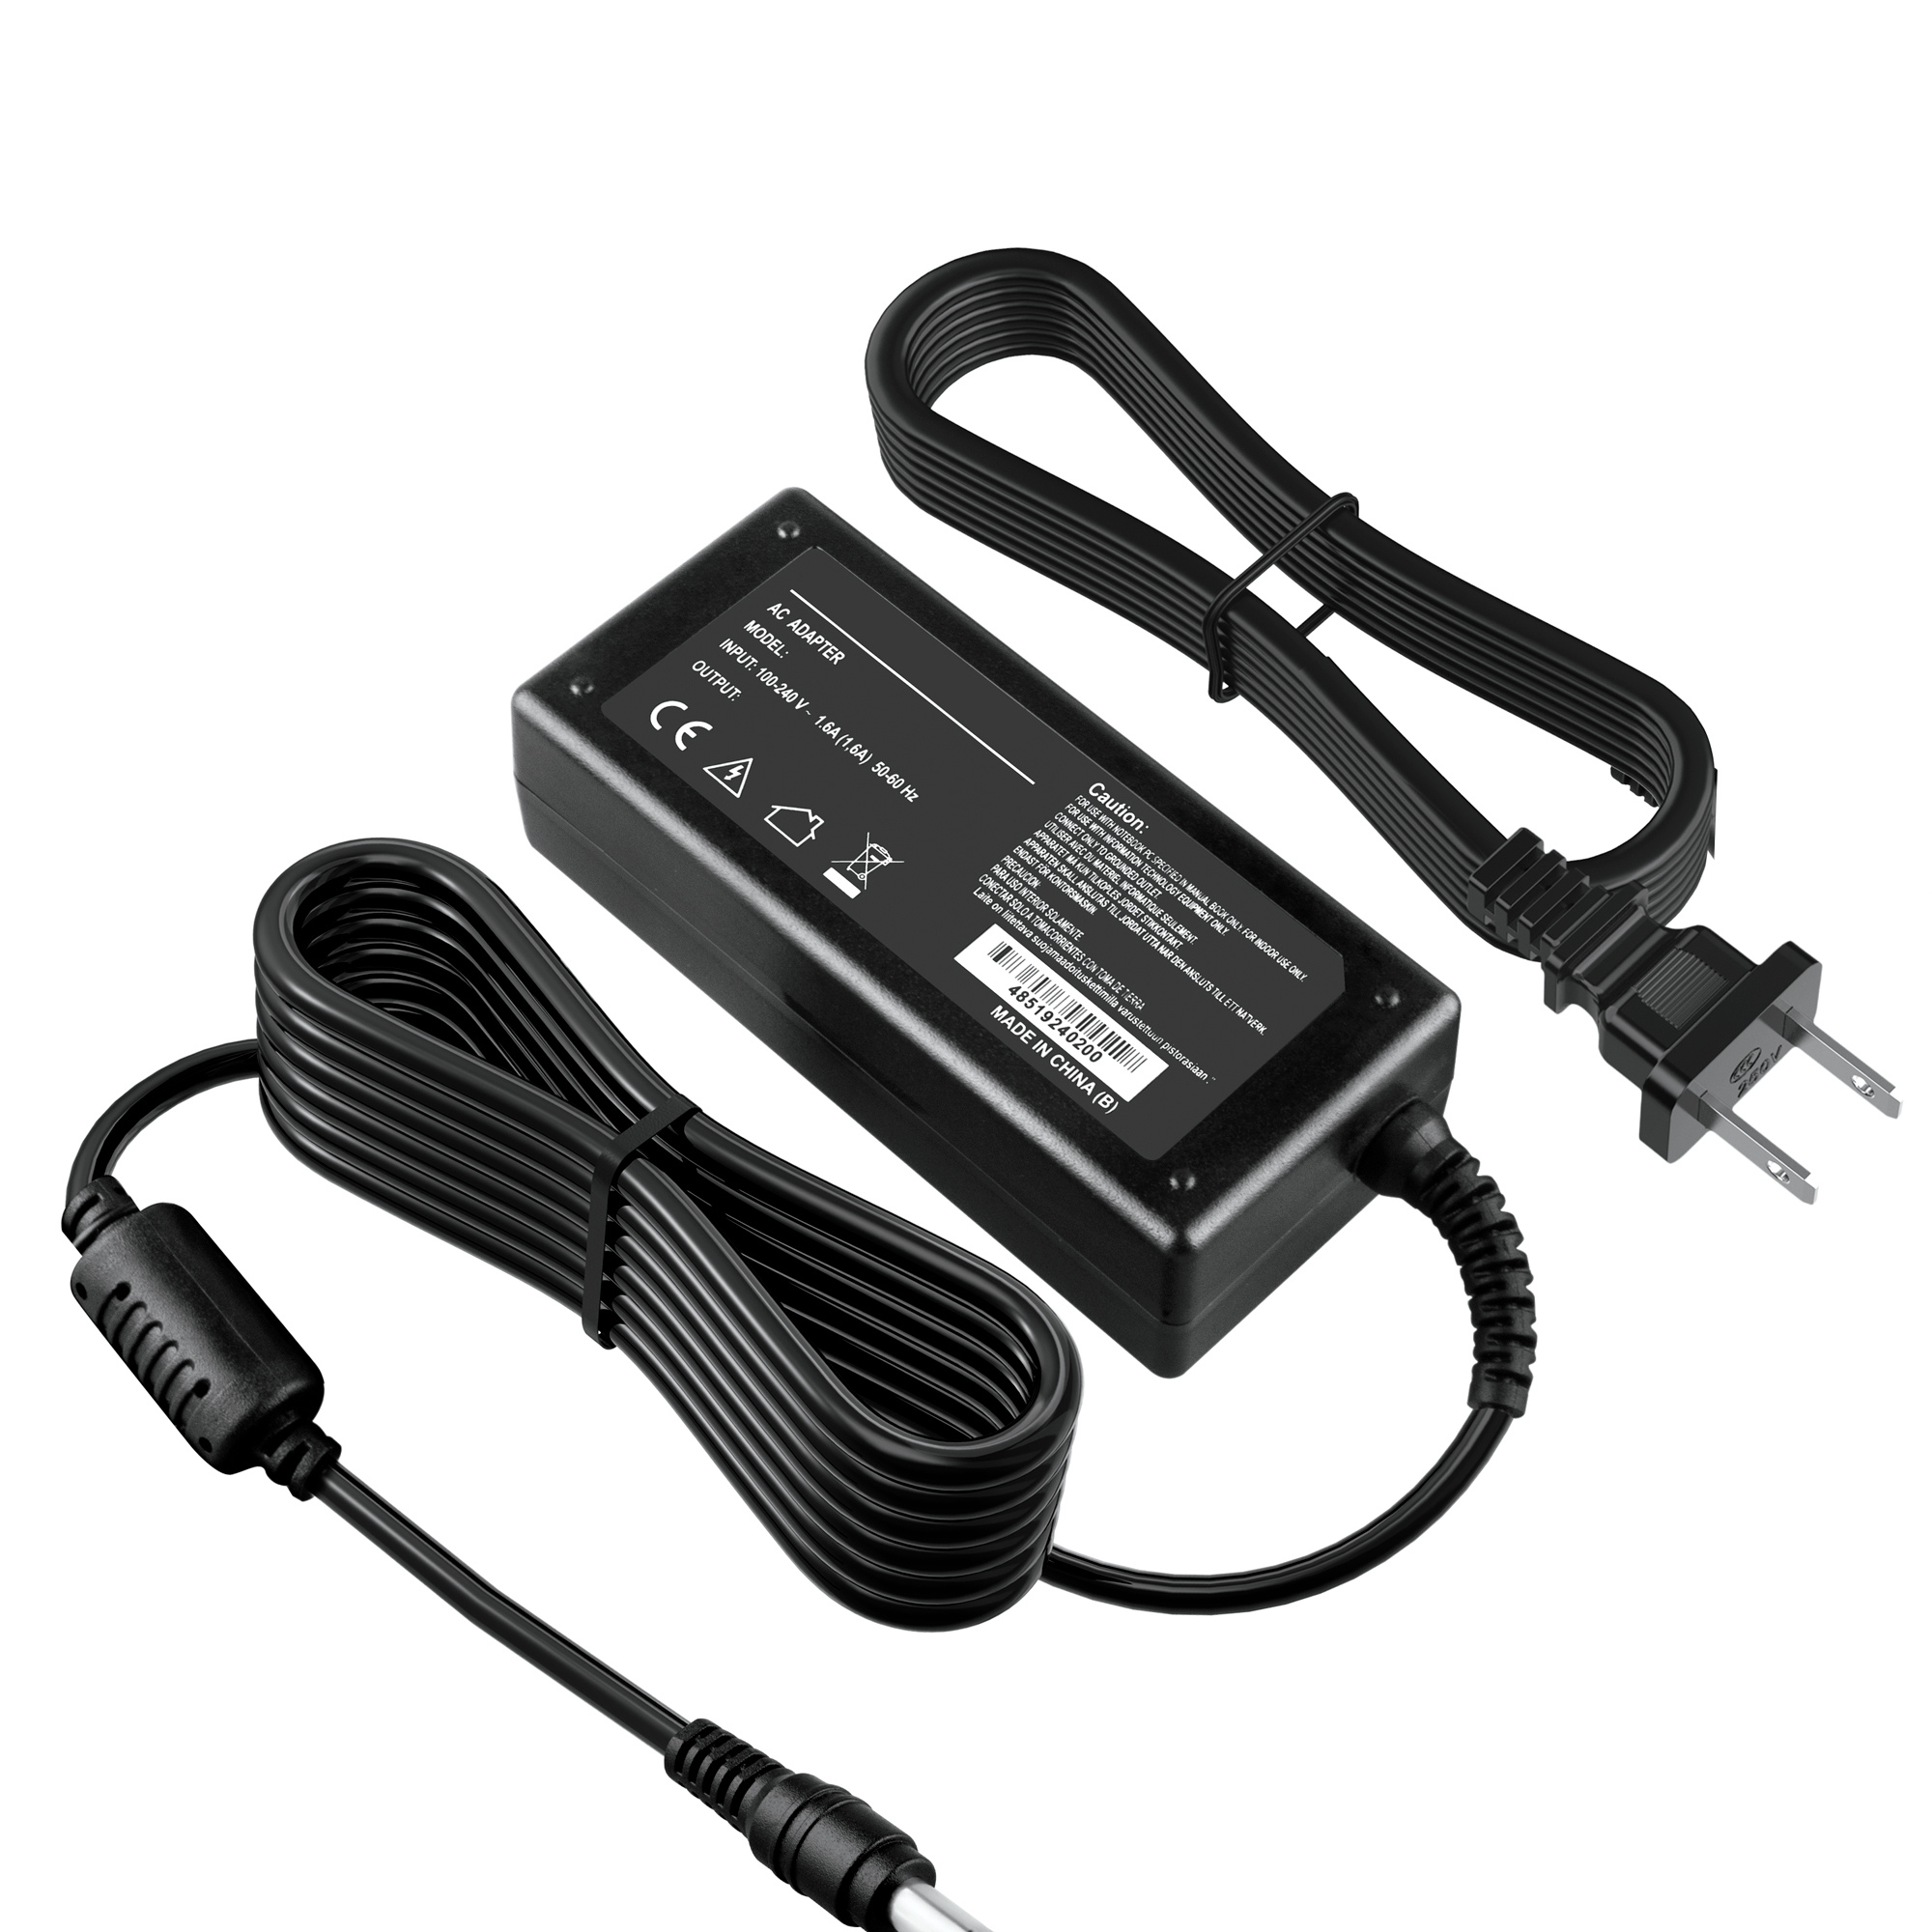 PKPOWER 16V 2.5A AC DC Adapter for ScanSnap SV600 FI-SV600 FI-SV600A FI-SV600A-P PA03641-B305 fi-7030 PA03750-B005 PA03750-B001 N7100 PA03706-B205 Scanner, FMC-AC313S Power Supply - image 1 of 5